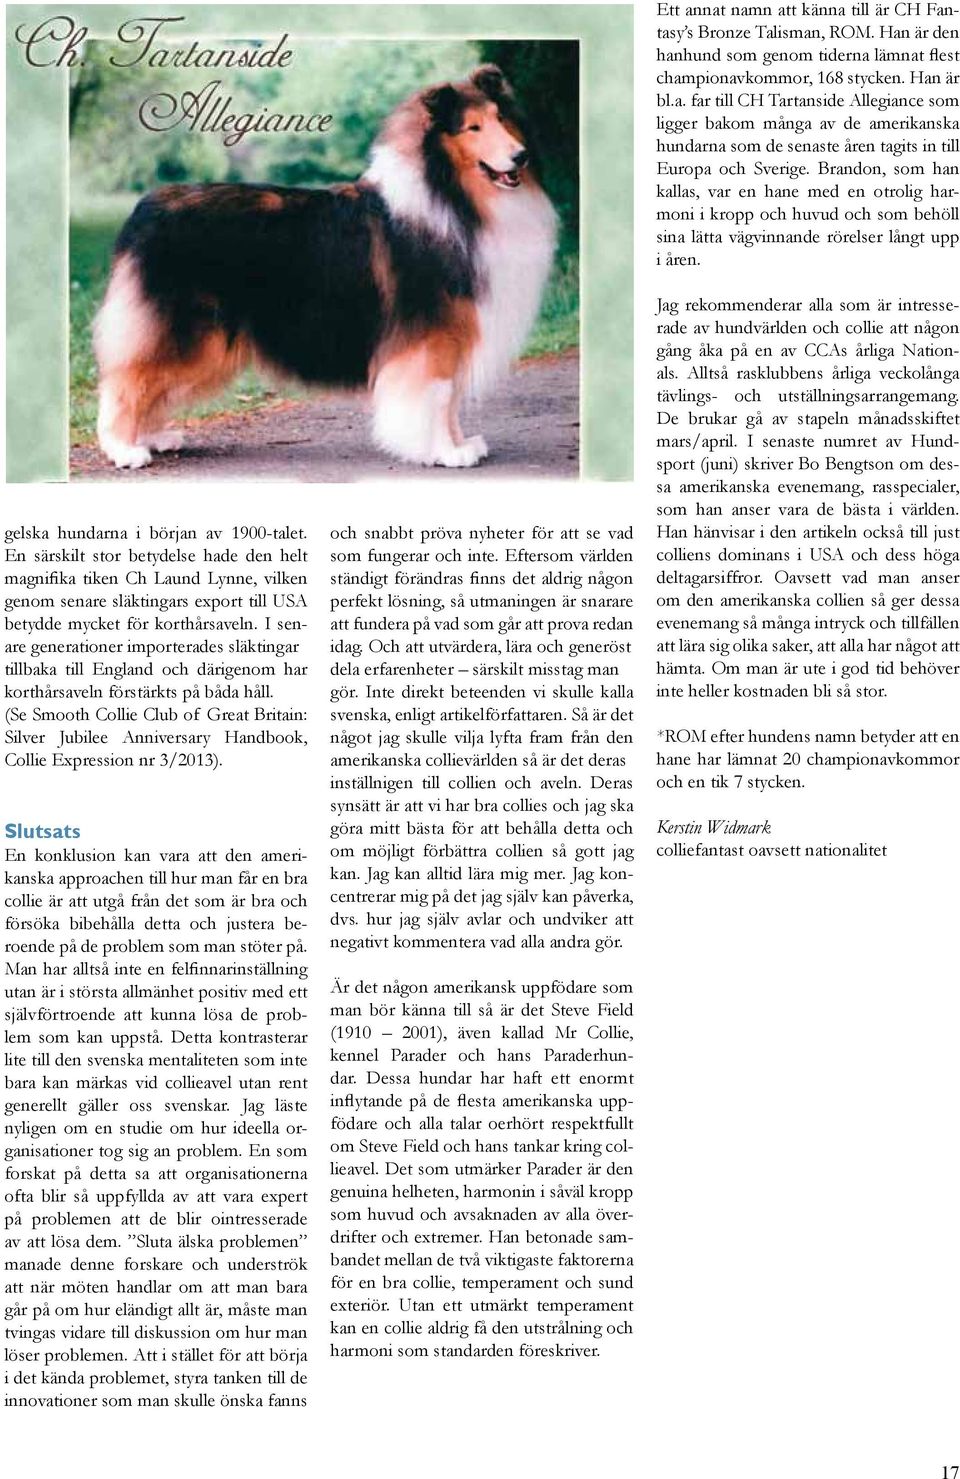 (Se Smooth Collie Club of Great Britain: Silver Jubilee Anniversary Handbook, Collie Expression nr 3/2013).